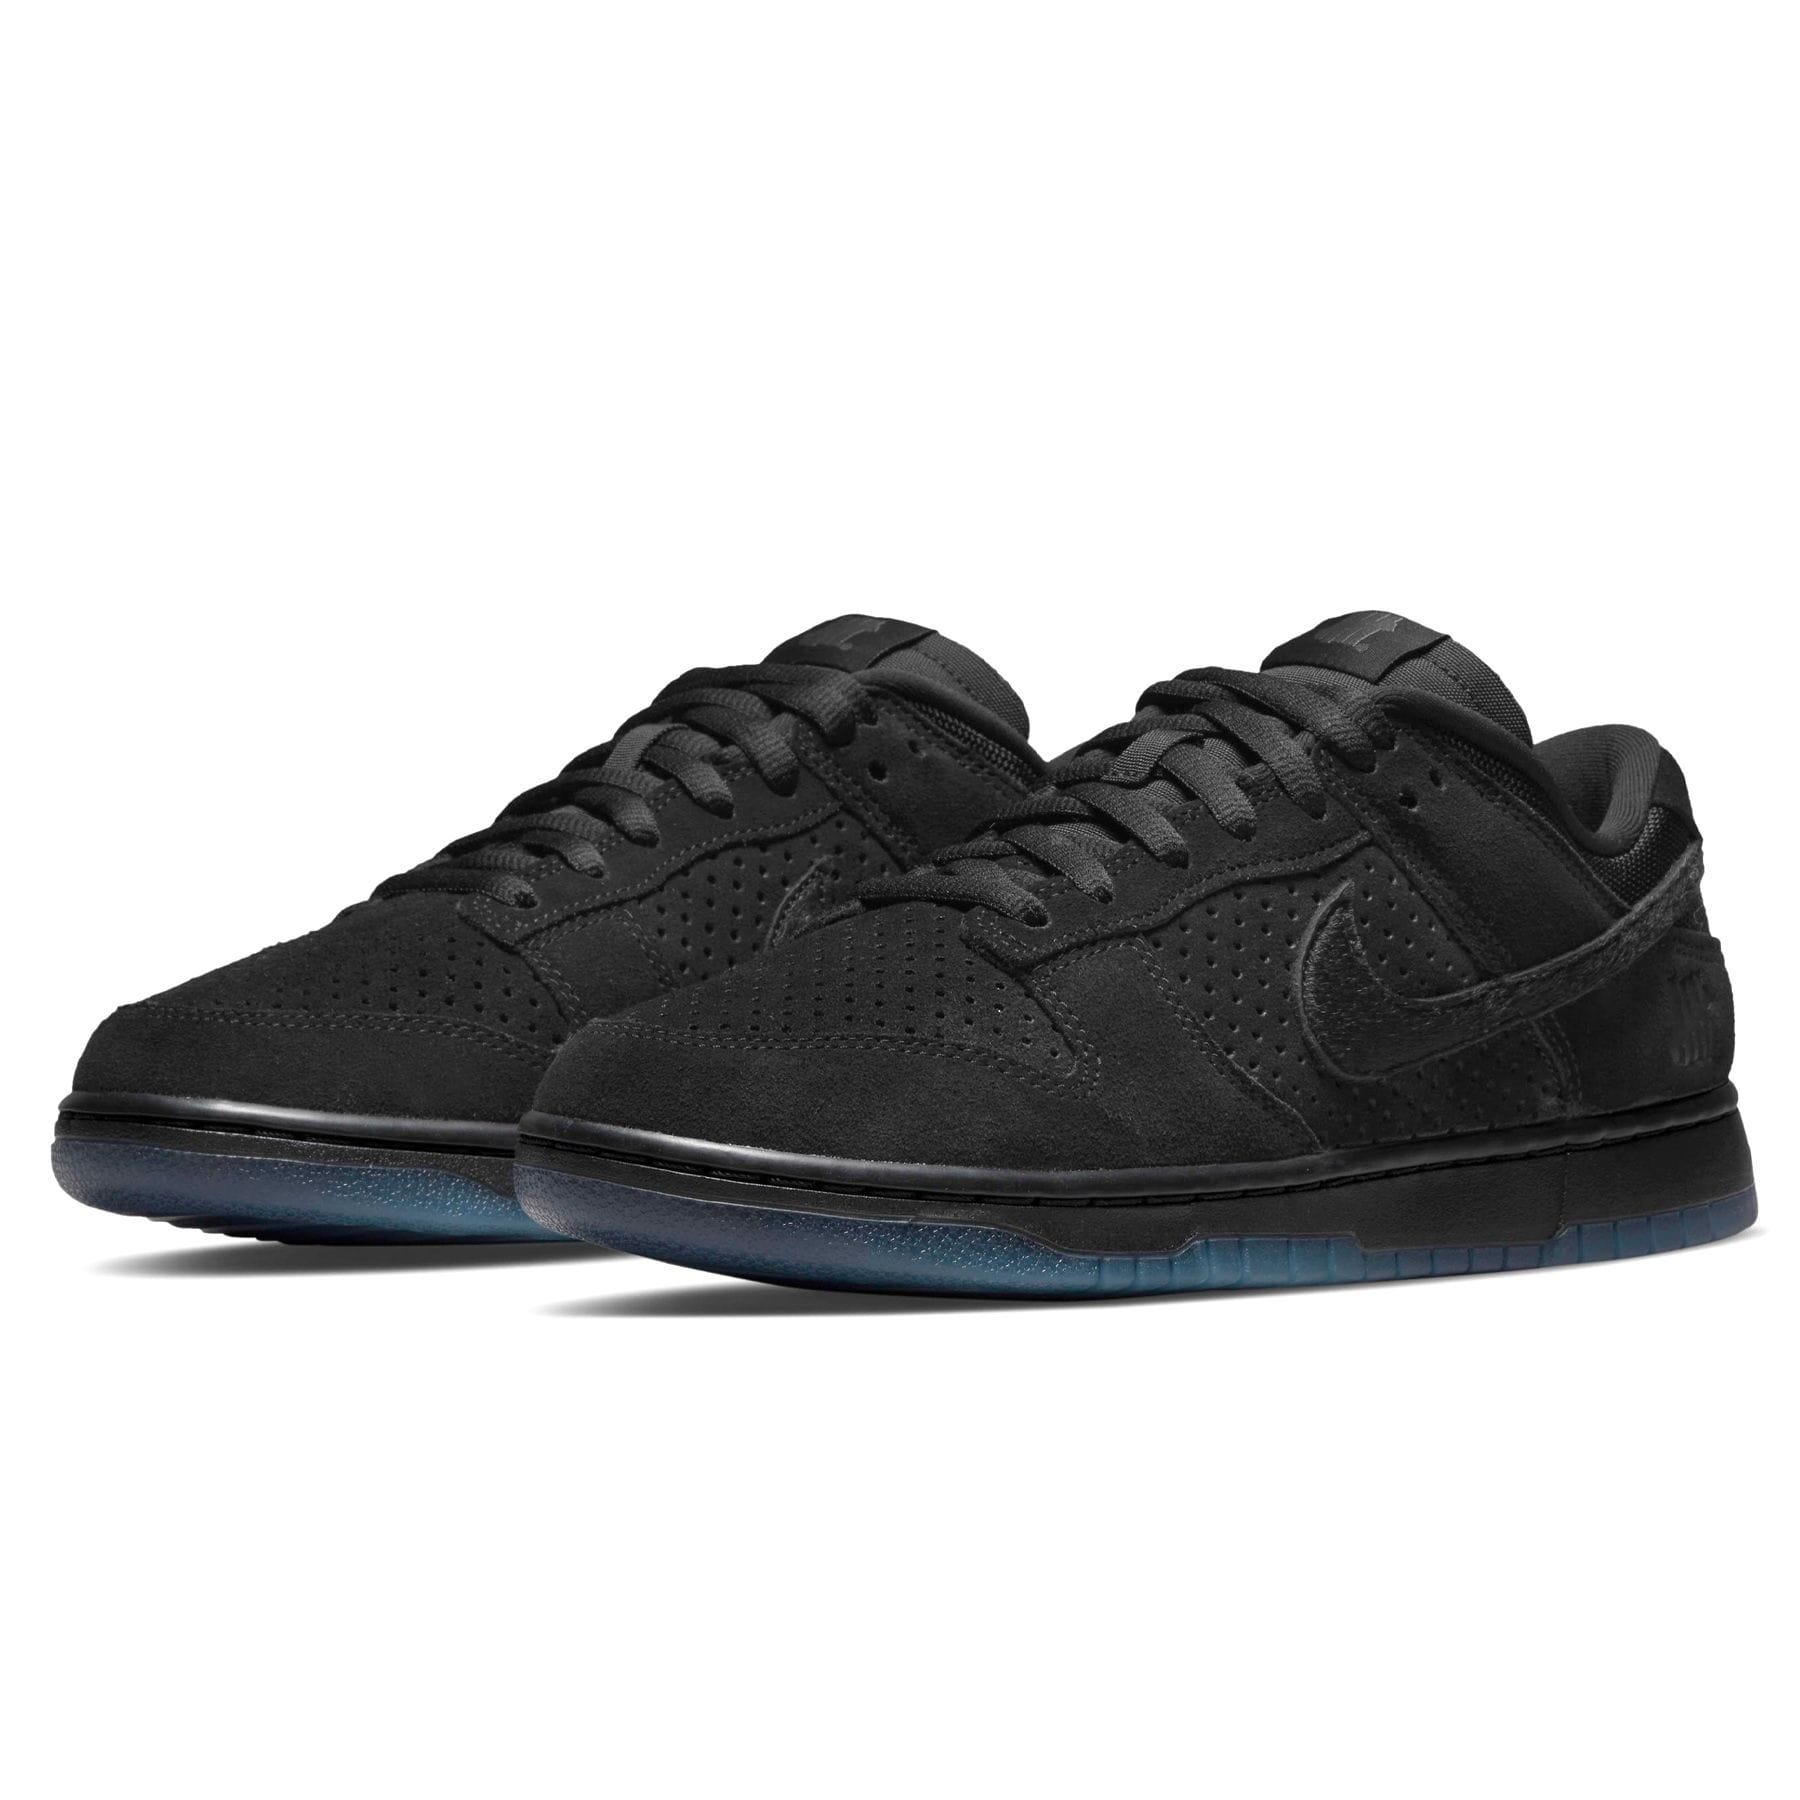 UNDEFEATED × NIKE DUNK LOW SP BLACK 26.0